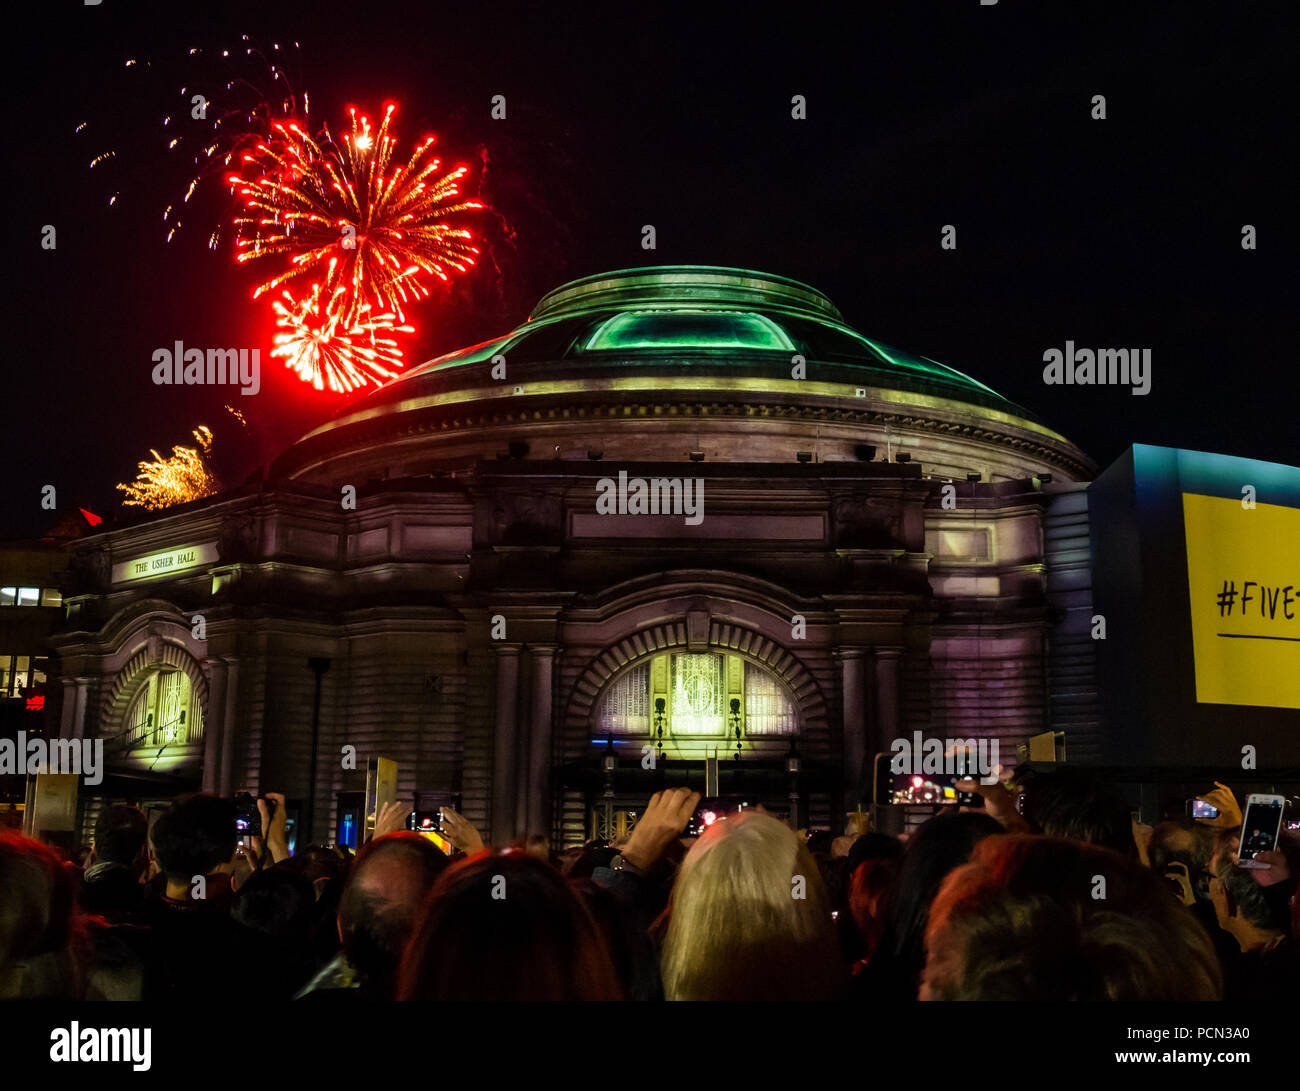 Edinburgh, UK. 3rd Aug 2018. Aberdeen Standard Investments sponsors the Edinburgh International Festival 2018 opening event Five Telegrams with a crowd in Festival Square. Celebrating Scotland’s Year of Young People and reflecting on the centenary of the end of the Great War with commissioned music by Anna Meredith and digital projection onto the Usher Hall by 59 Productions, the free outdoor event is Inspired by telegrams sent by young soldiers in 1918. Fireworks from the Edinburgh Tattoo before the event Stock Photo